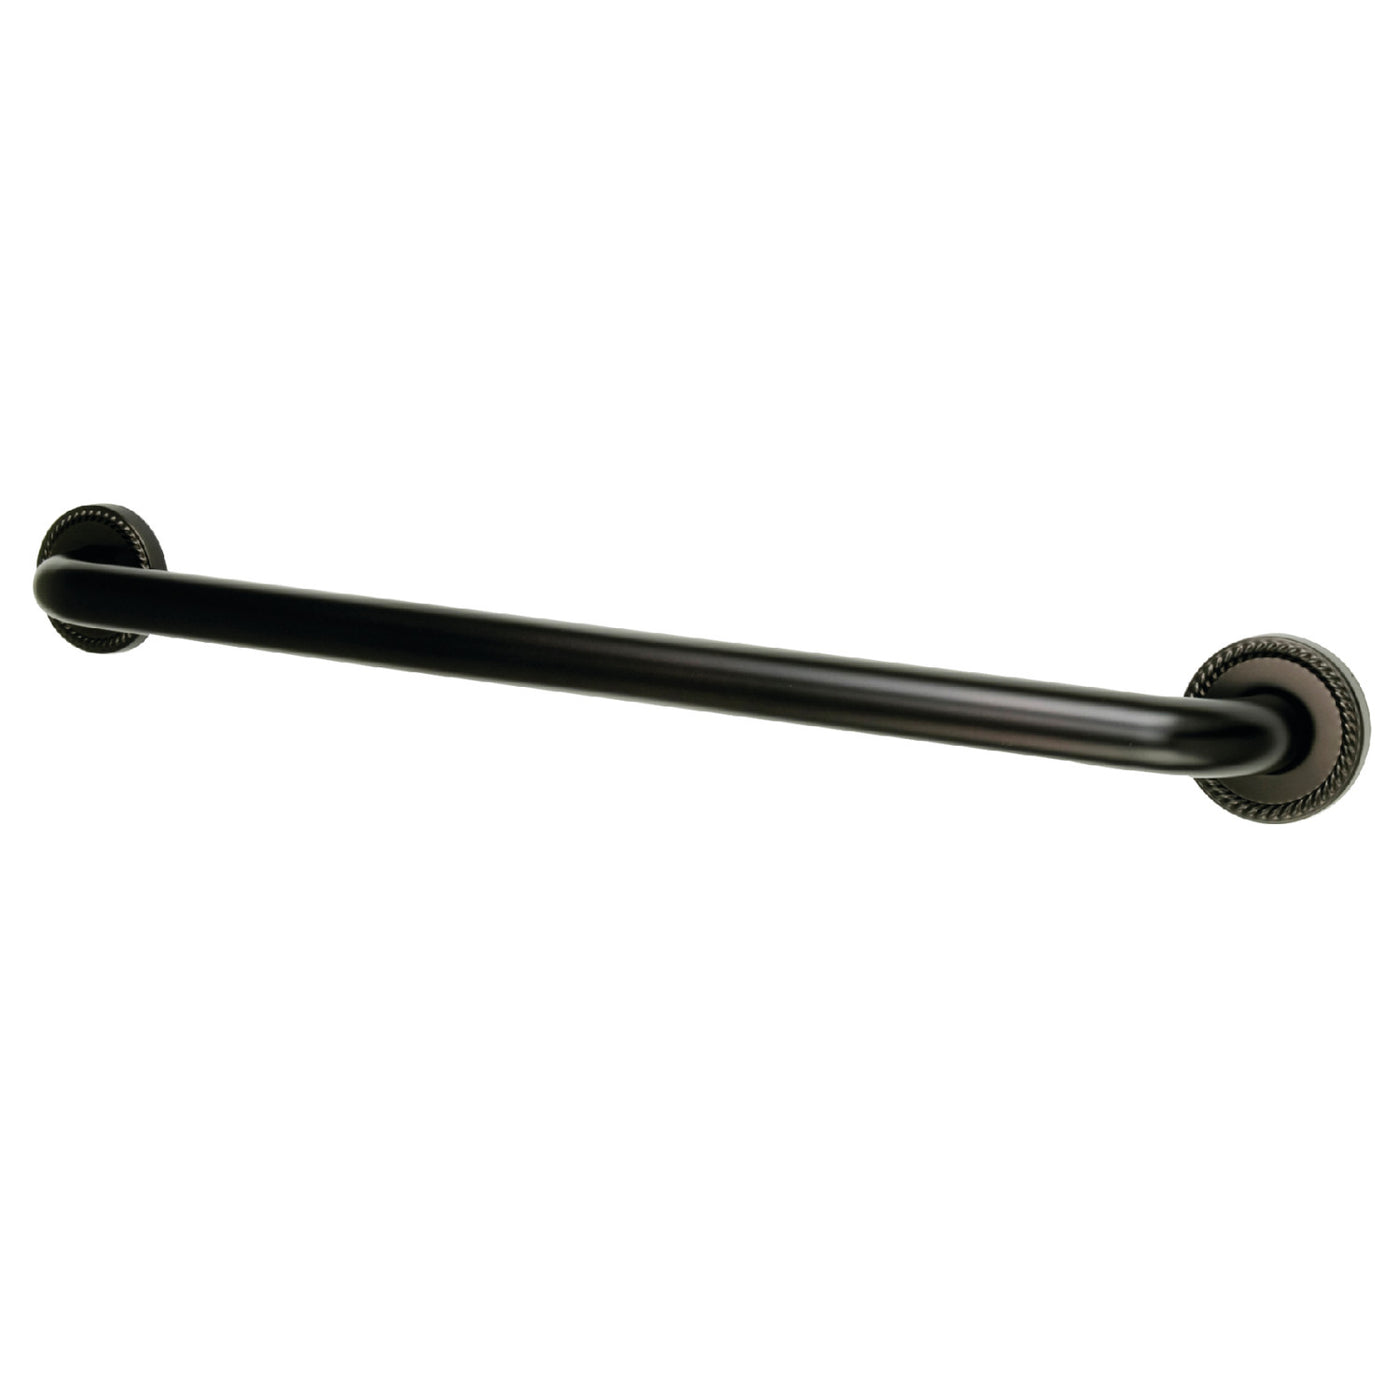 Elements of Design EDR814125 12-Inch x 1-1/4-Inch O.D Grab Bar, Oil Rubbed Bronze